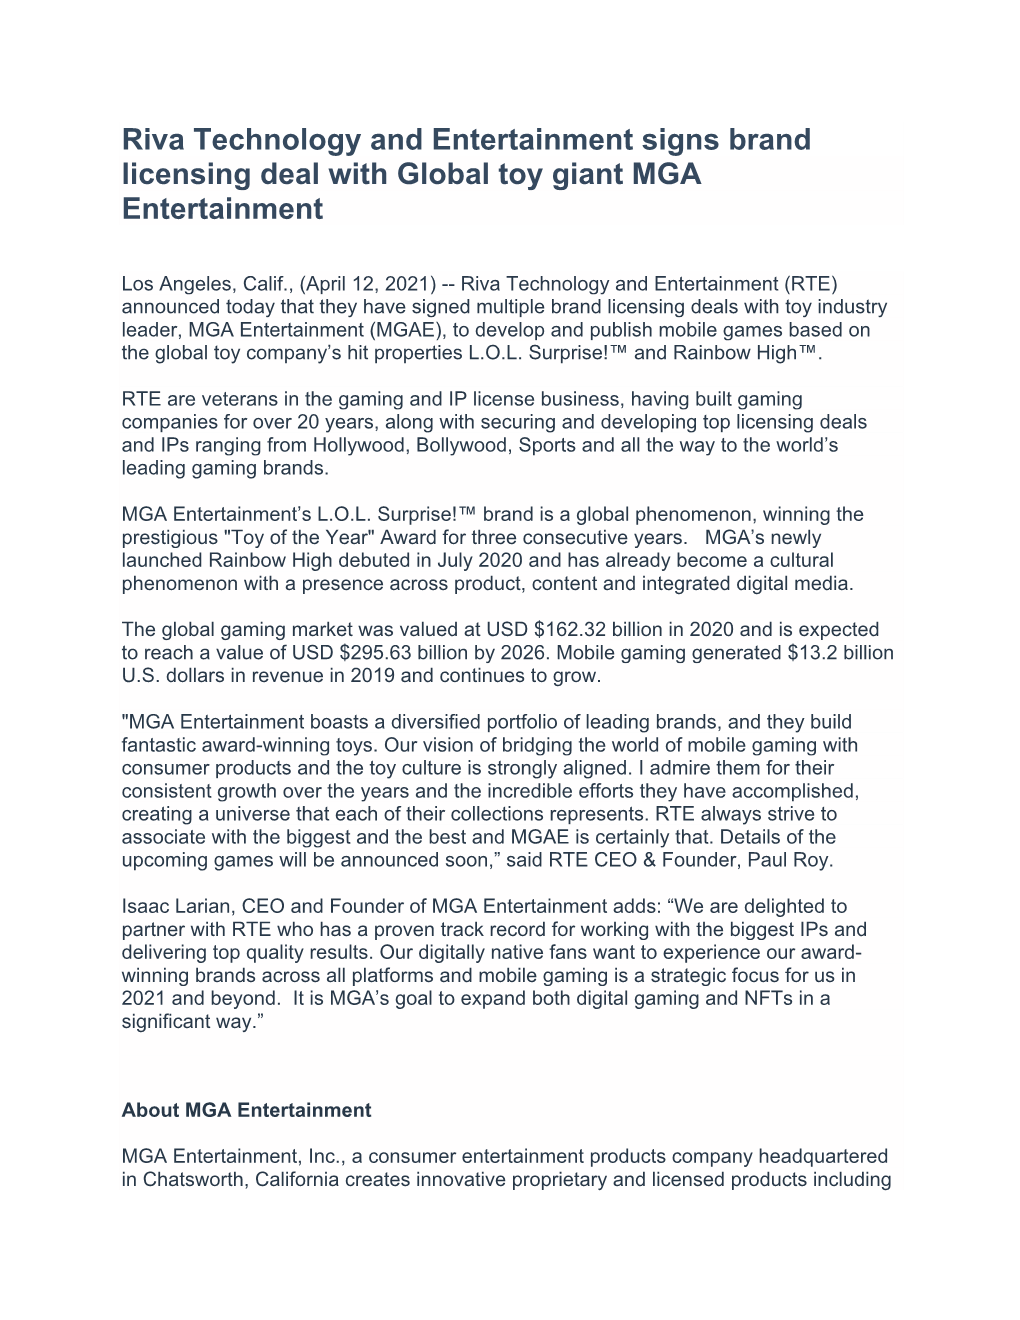 Riva Technology and Entertainment Signs Brand Licensing Deal with Global Toy Giant MGA Entertainment